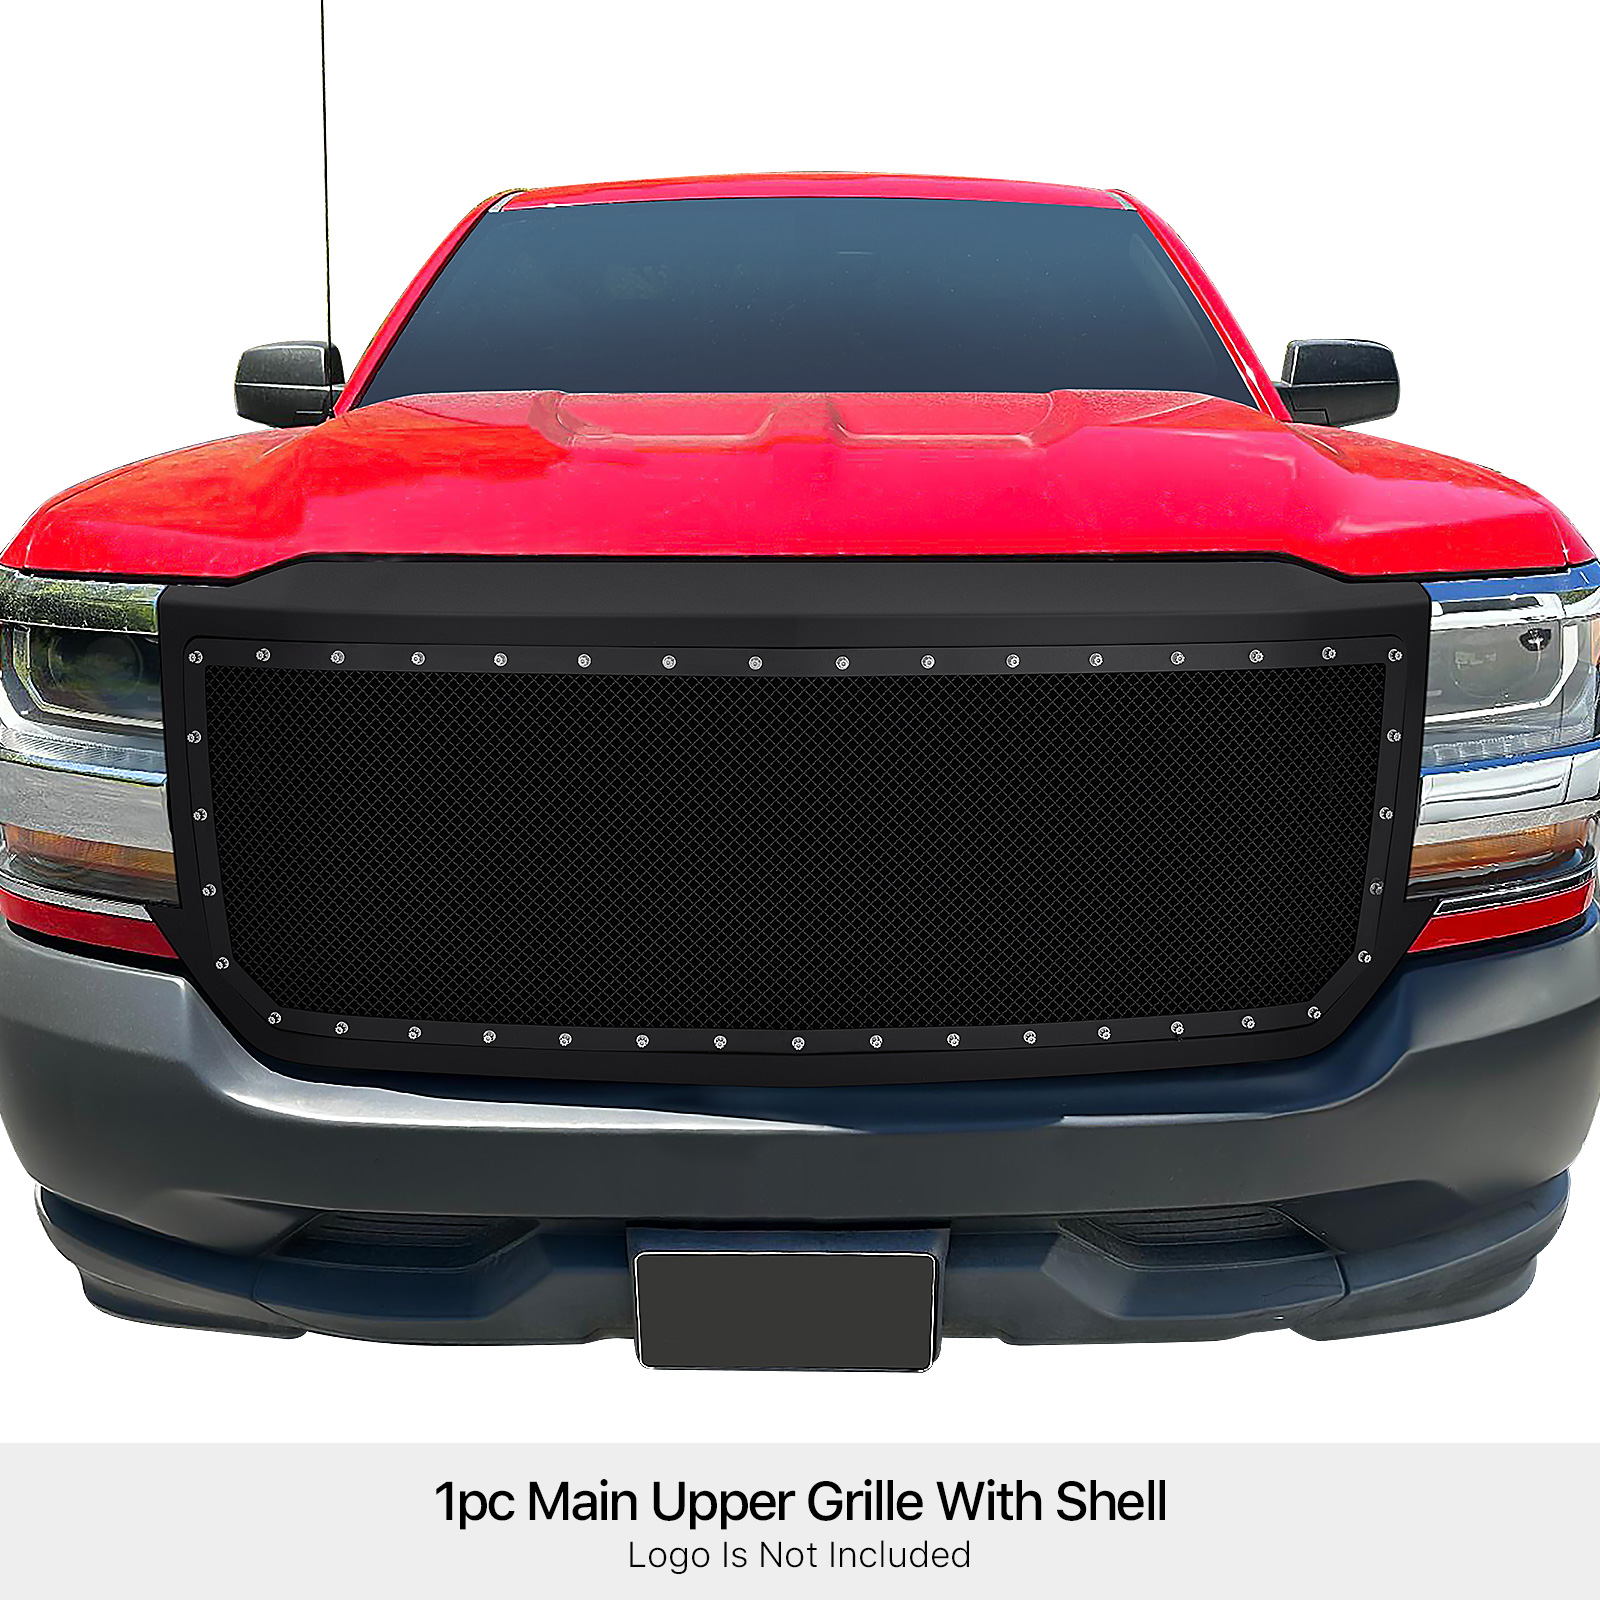 2016-2018 Chevy Silverado 1500 Not For Z71 and High Country Model (Incl. 2019 Silverado 1500 LD) MAIN UPPER Package Grille